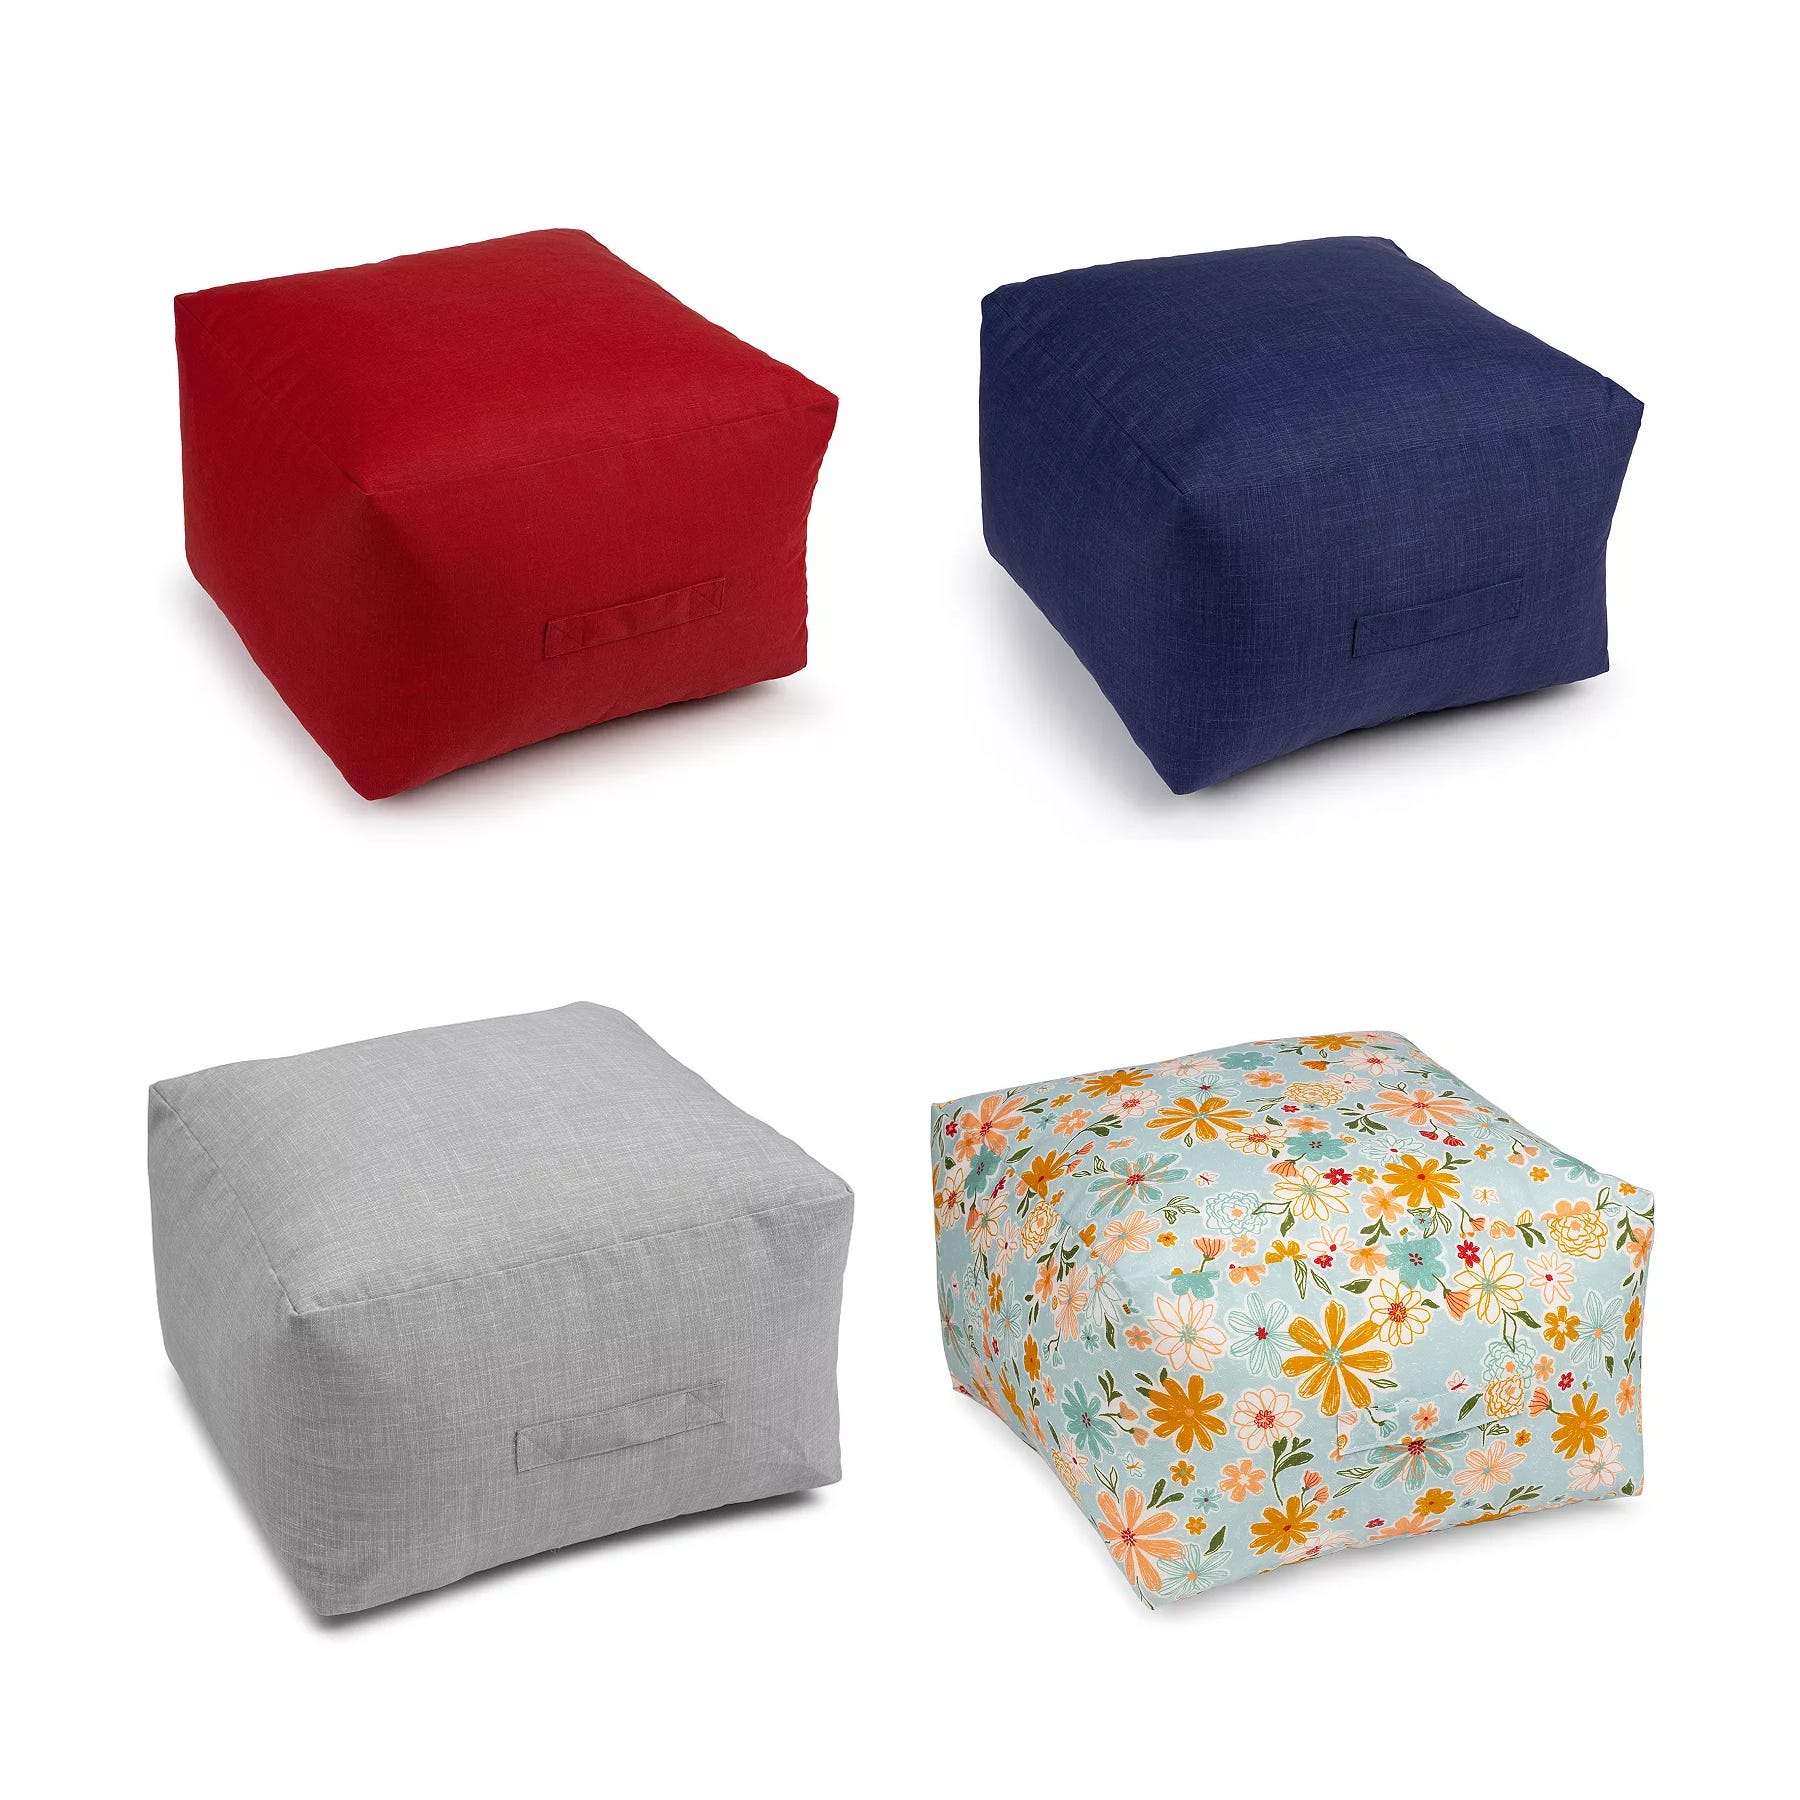 Four square ottomans in red, dark blue, gray, and a floral pattern.